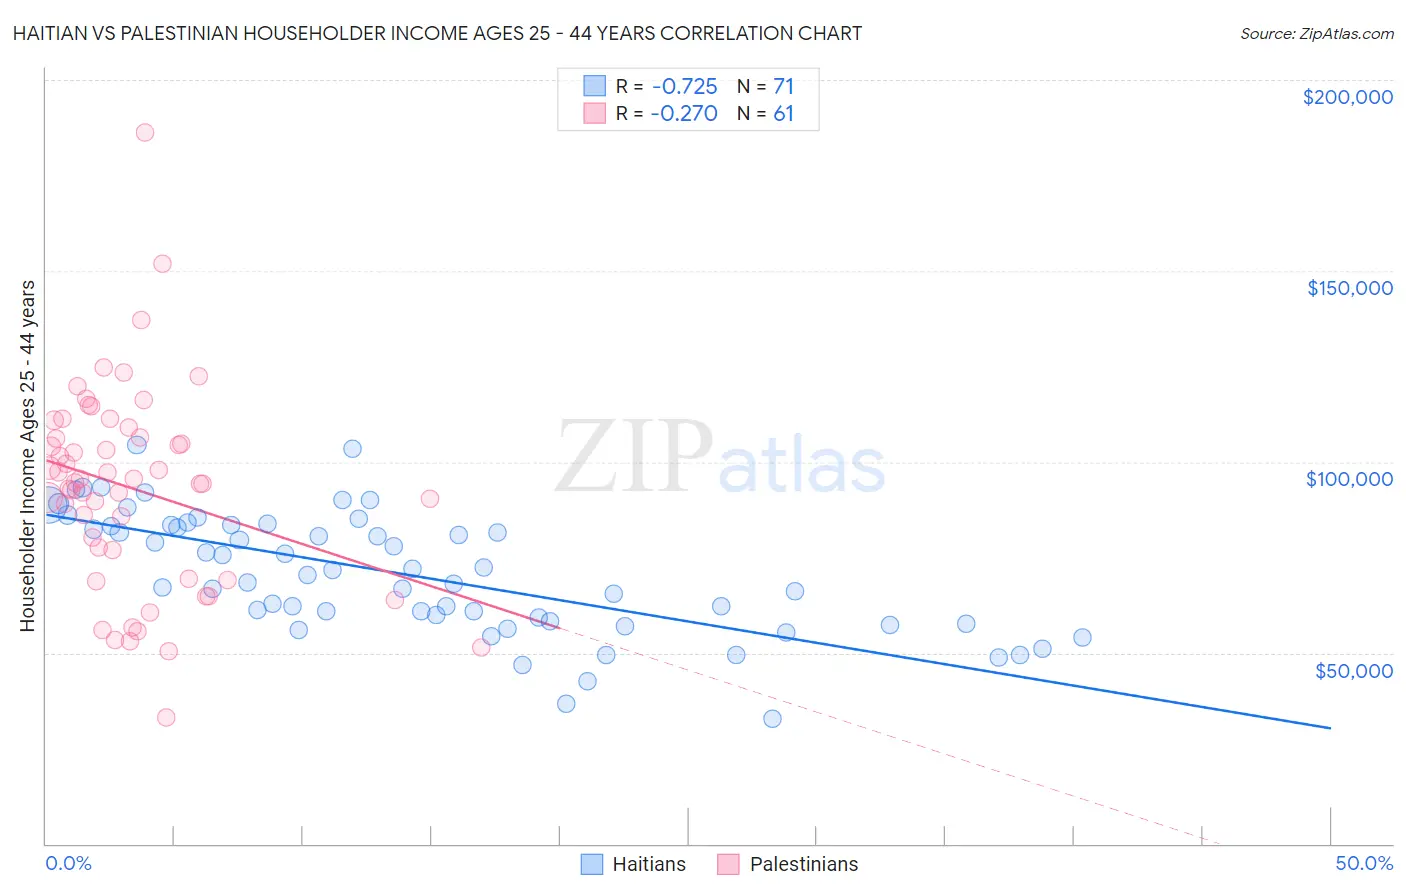 Haitian vs Palestinian Householder Income Ages 25 - 44 years